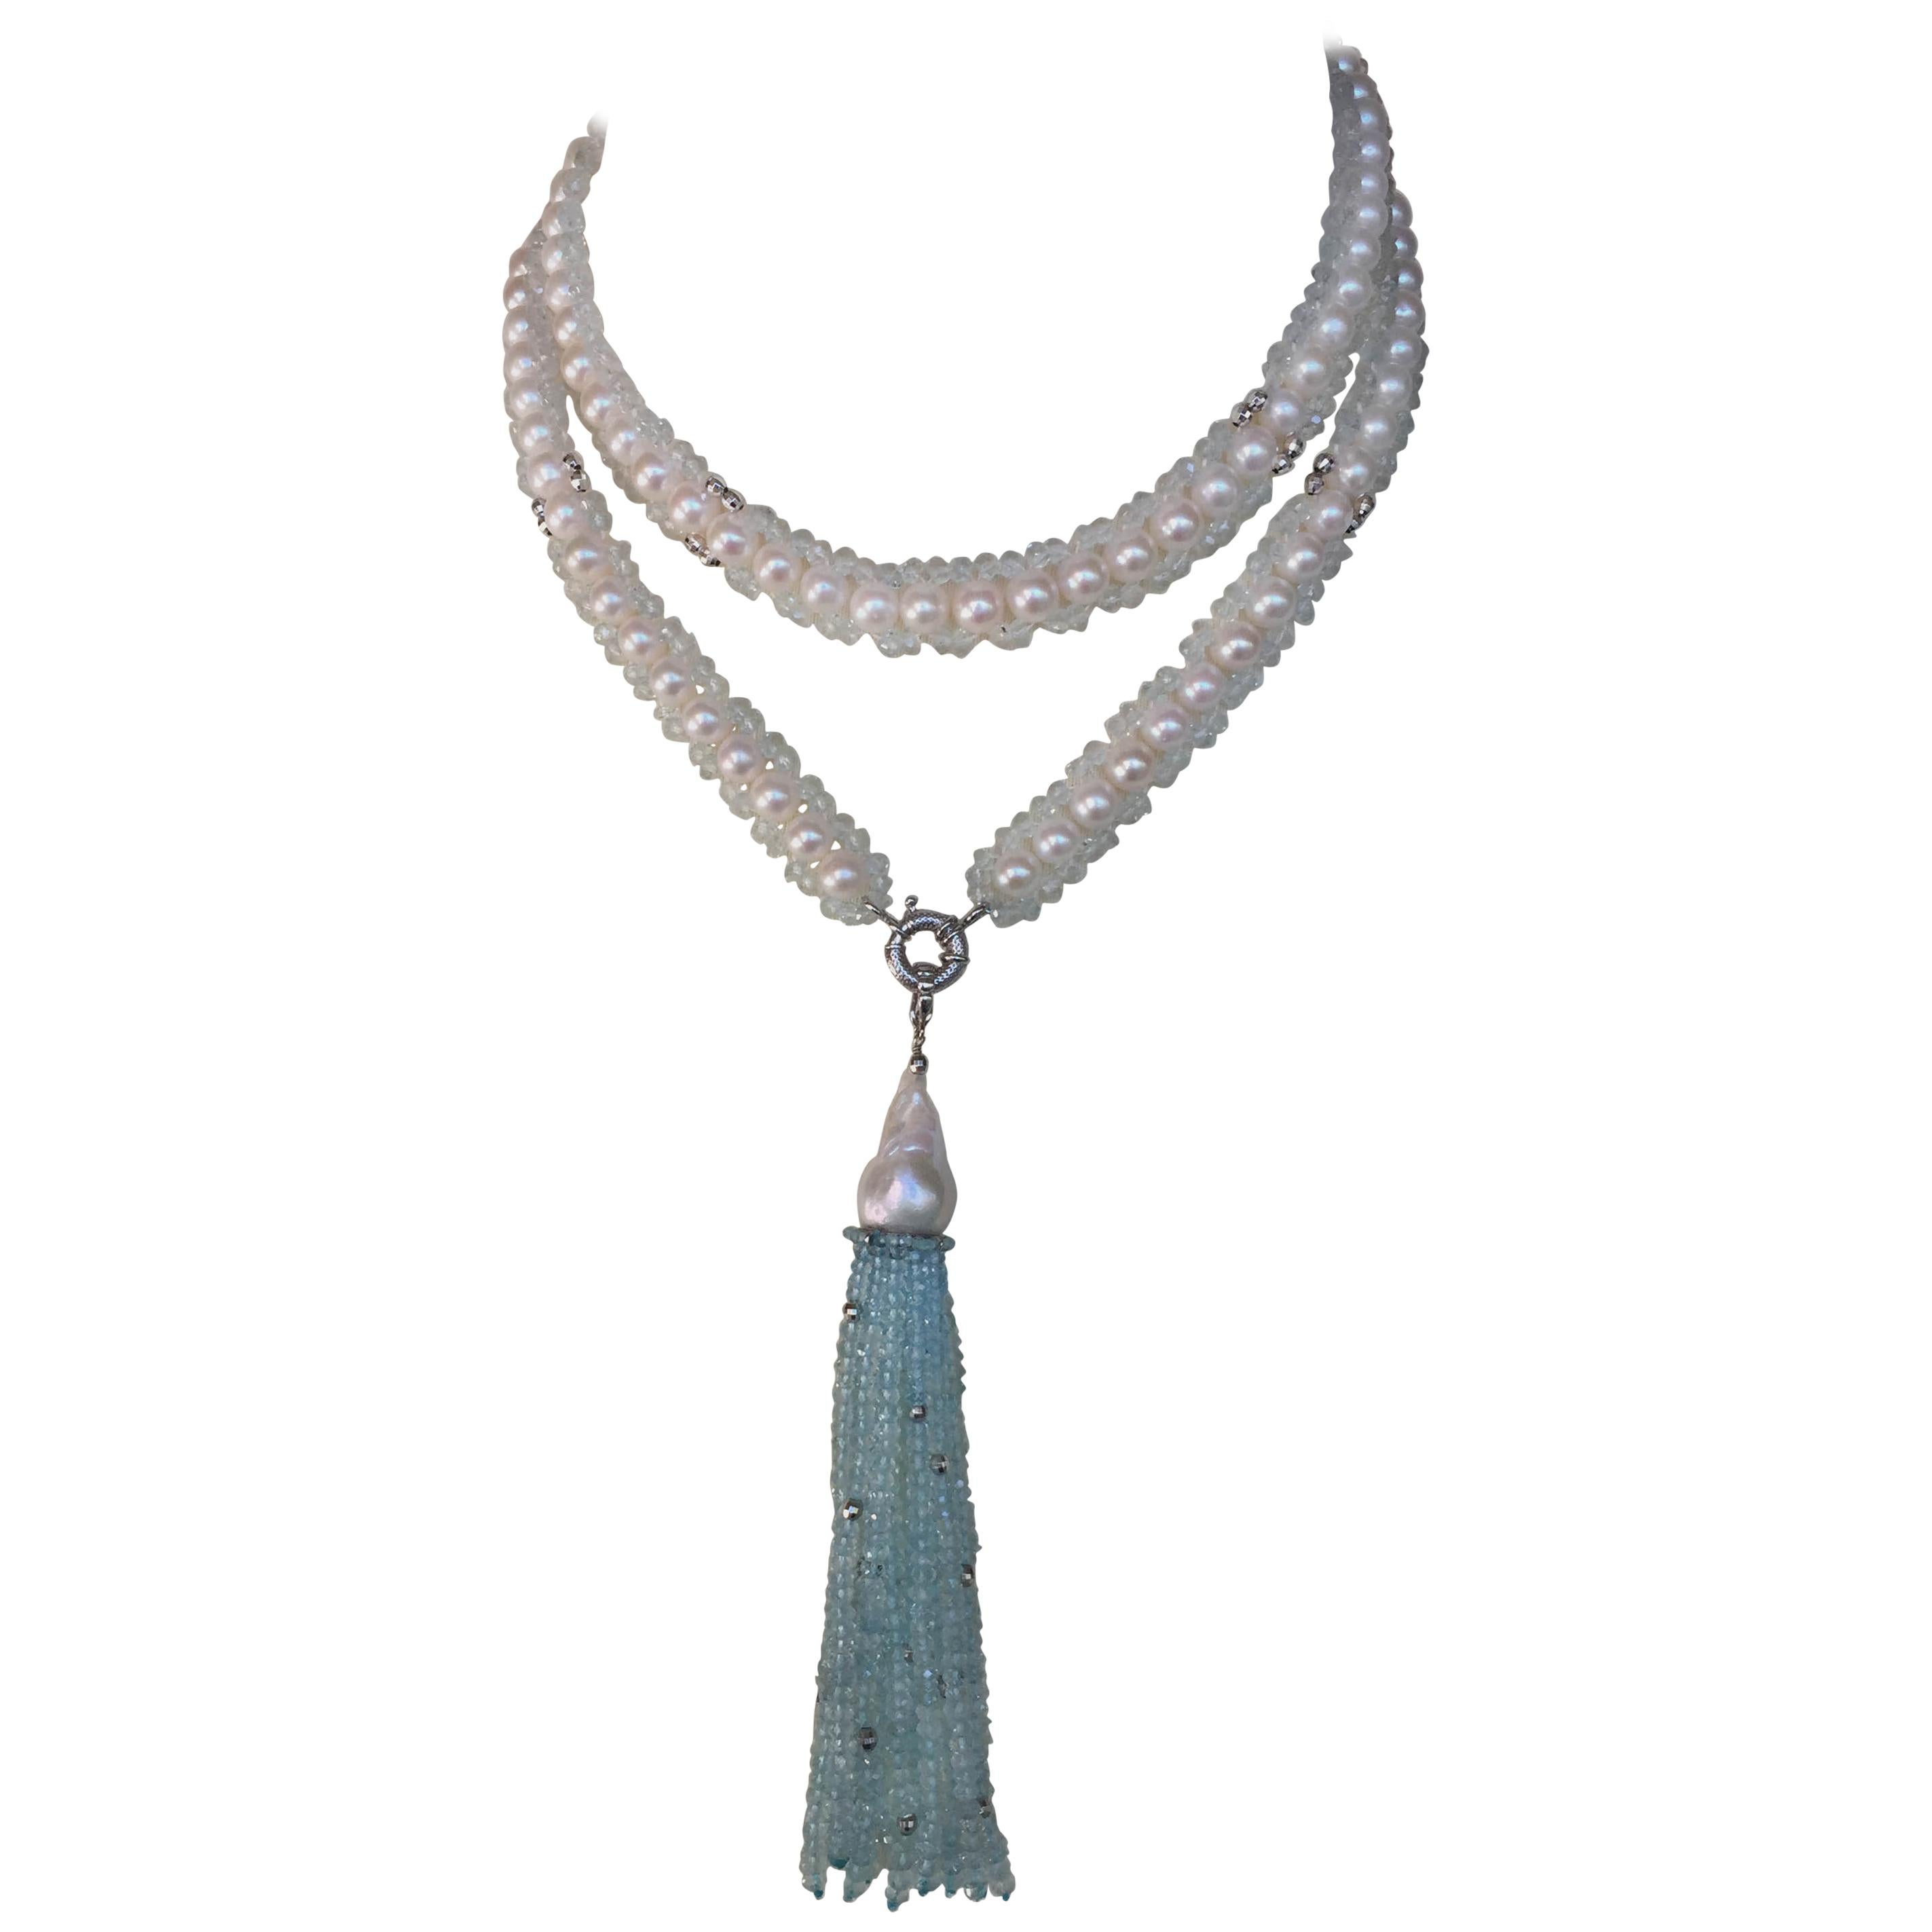 Handmade piece by Marina J. This beautiful Sautoir is made using all solid 14k White Gold, Faceted Aquamarine and stunning White Pearls. Woven into a classic design, the Pearls on this Sautoir display a soft iridescence and luster, perfectly